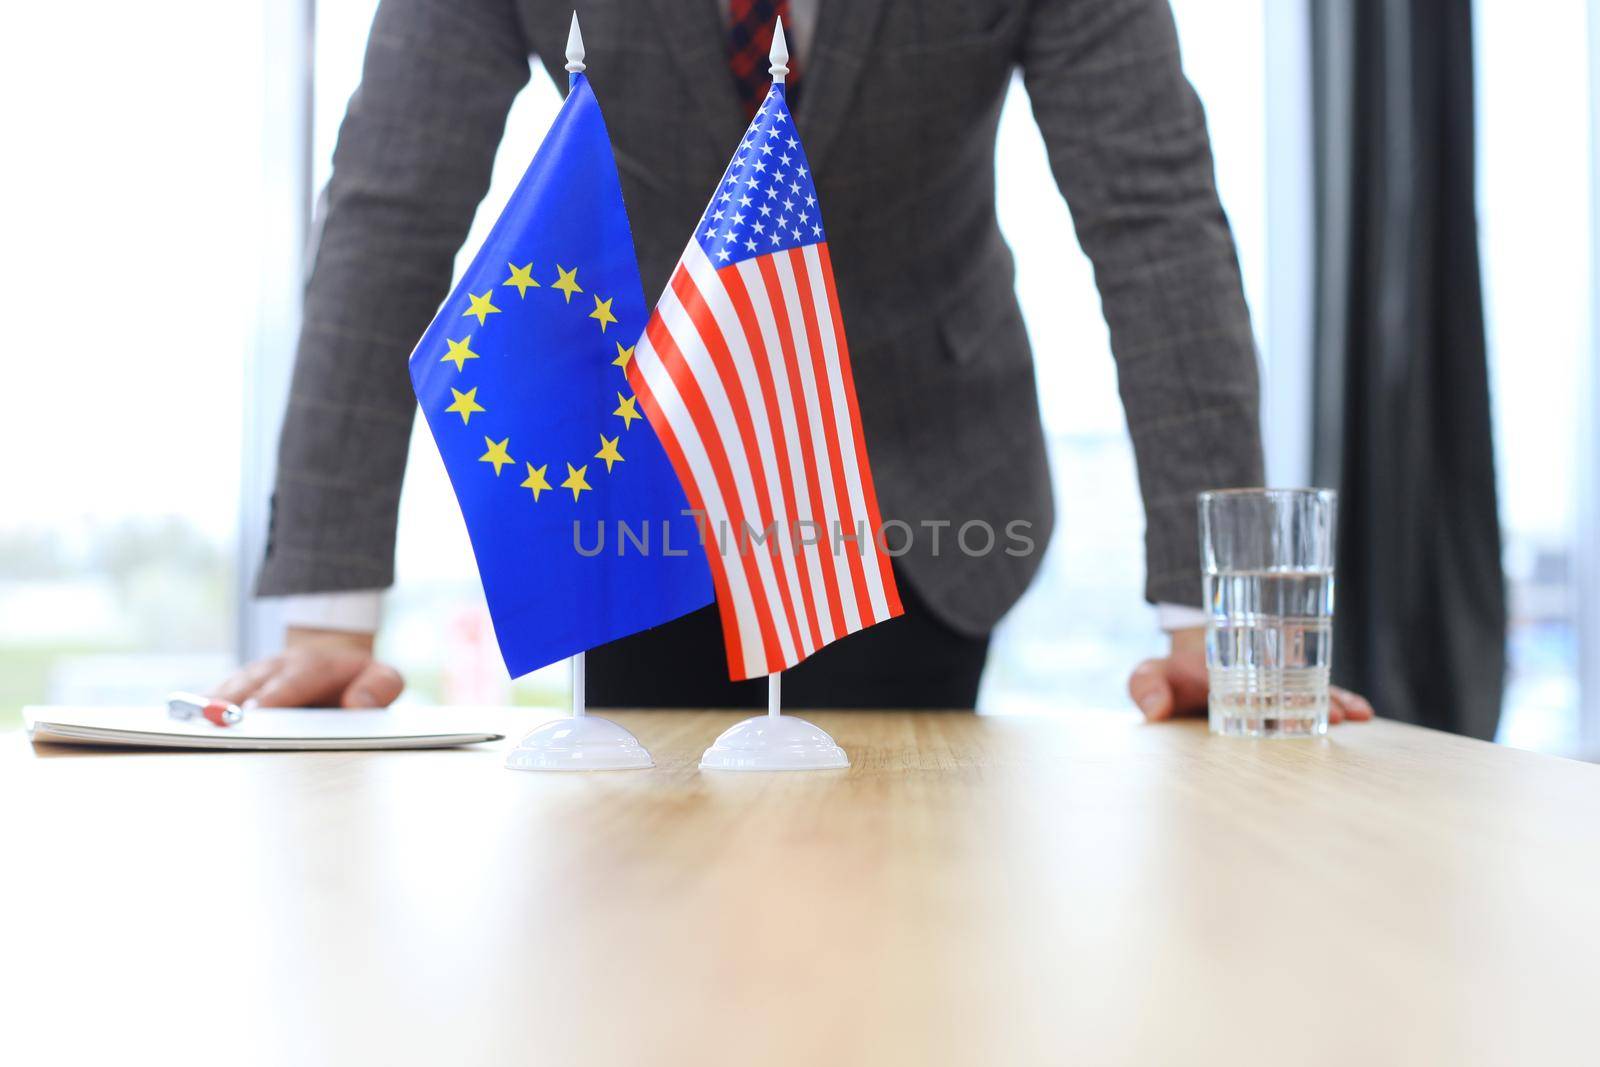 Chinese flag and flag of European Union with businessman near by by tsyhun